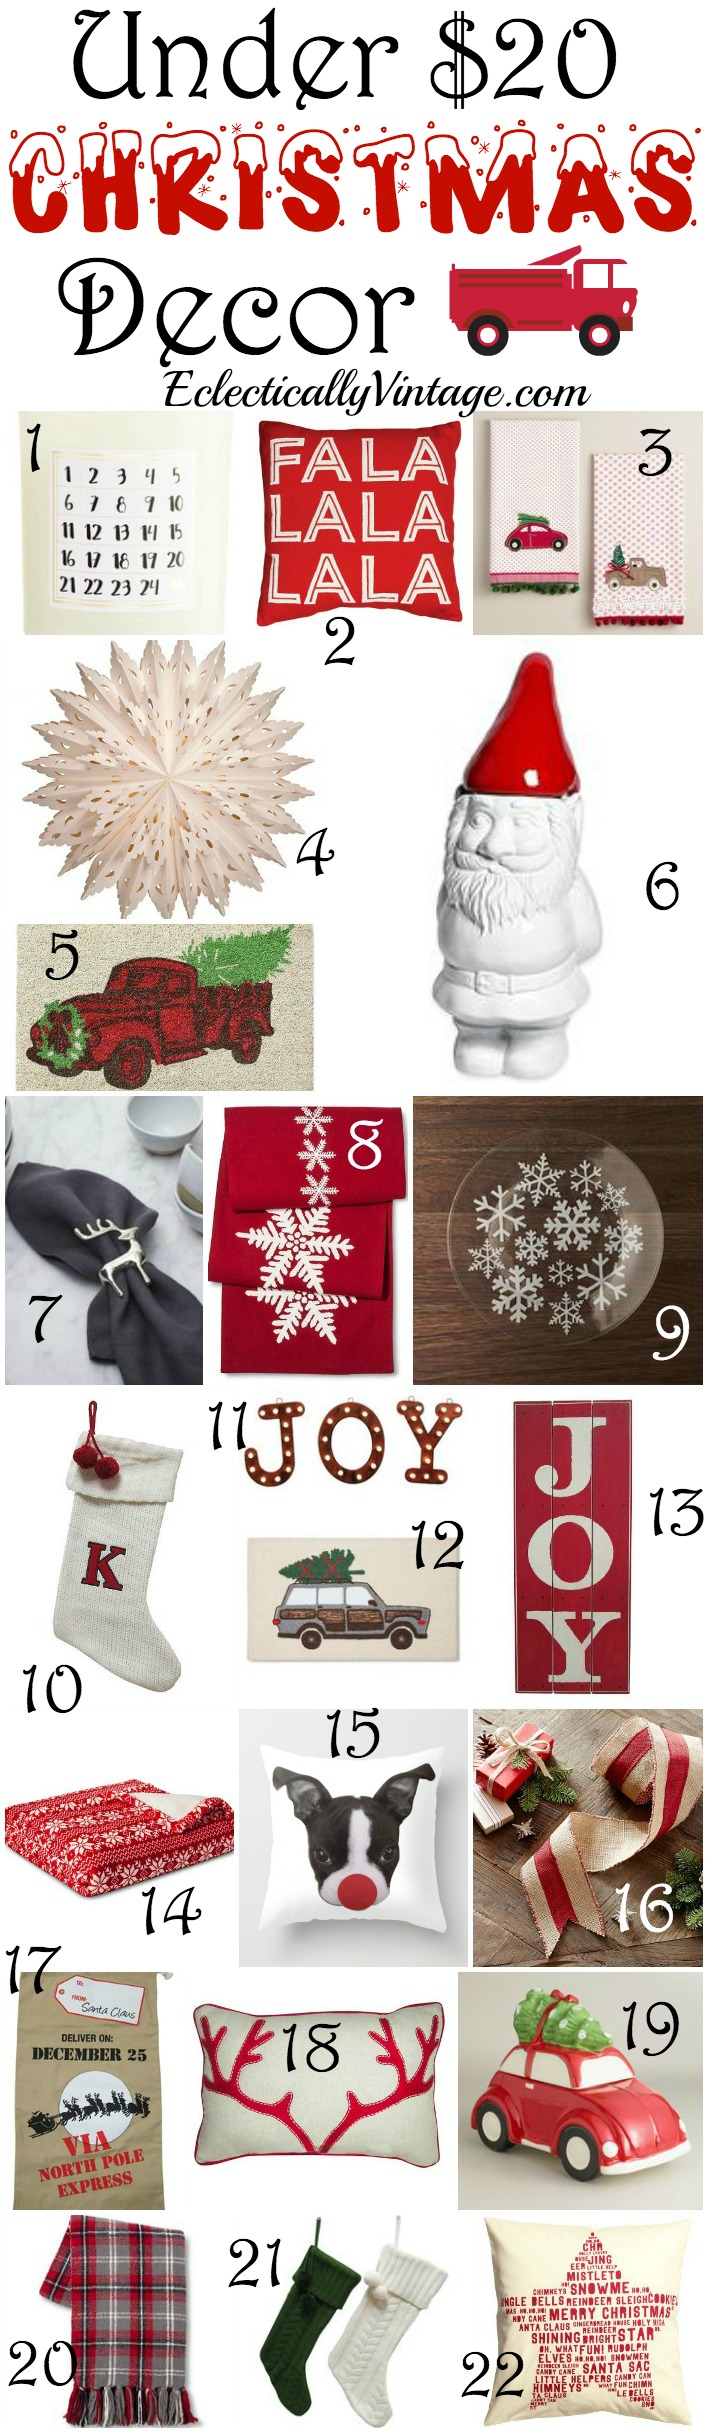 $20 or Less! Favorite Christmas Home Decor Finds